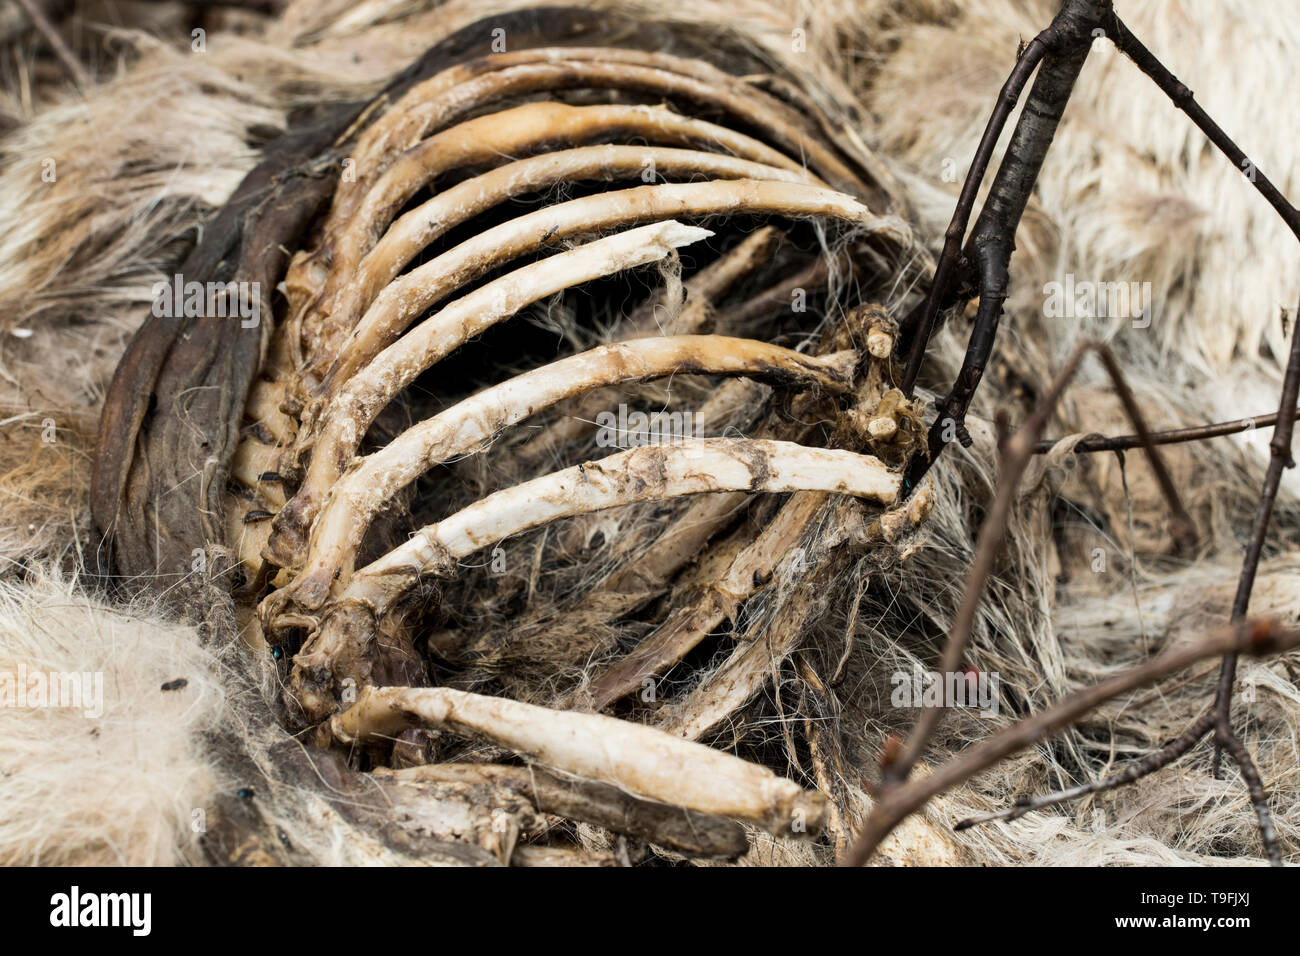 Rib cage of a dead coyote exposed from insects and active decay. Forensic study of entomology. Post-mortem dead animal. Decomposition close up. Stock Photo